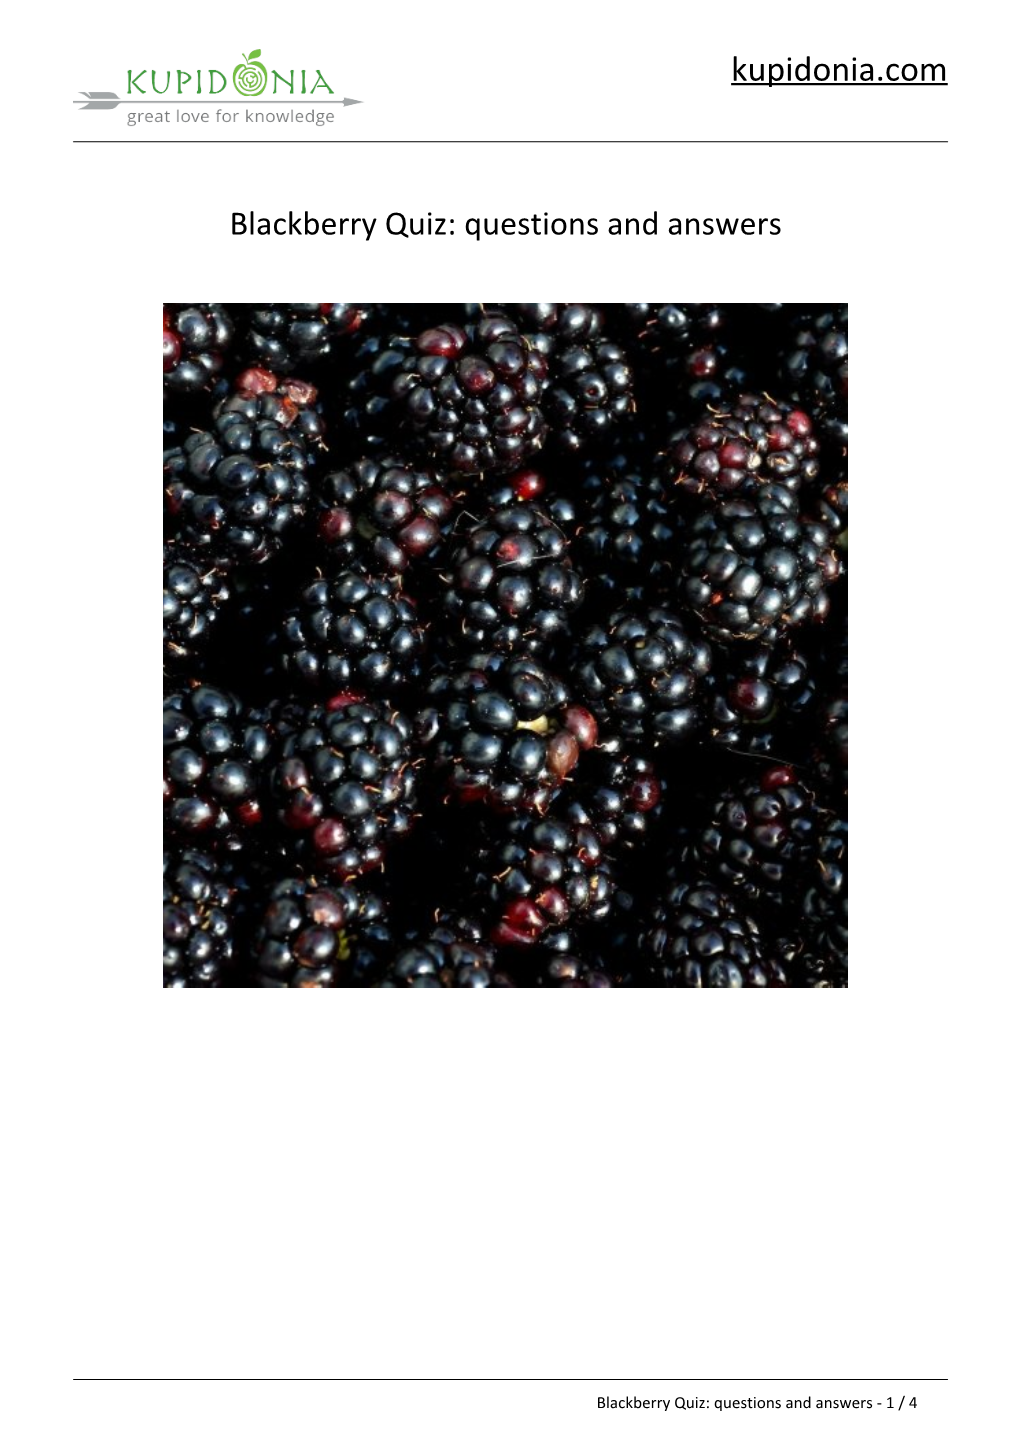 Blackberry Quiz: Questions and Answers